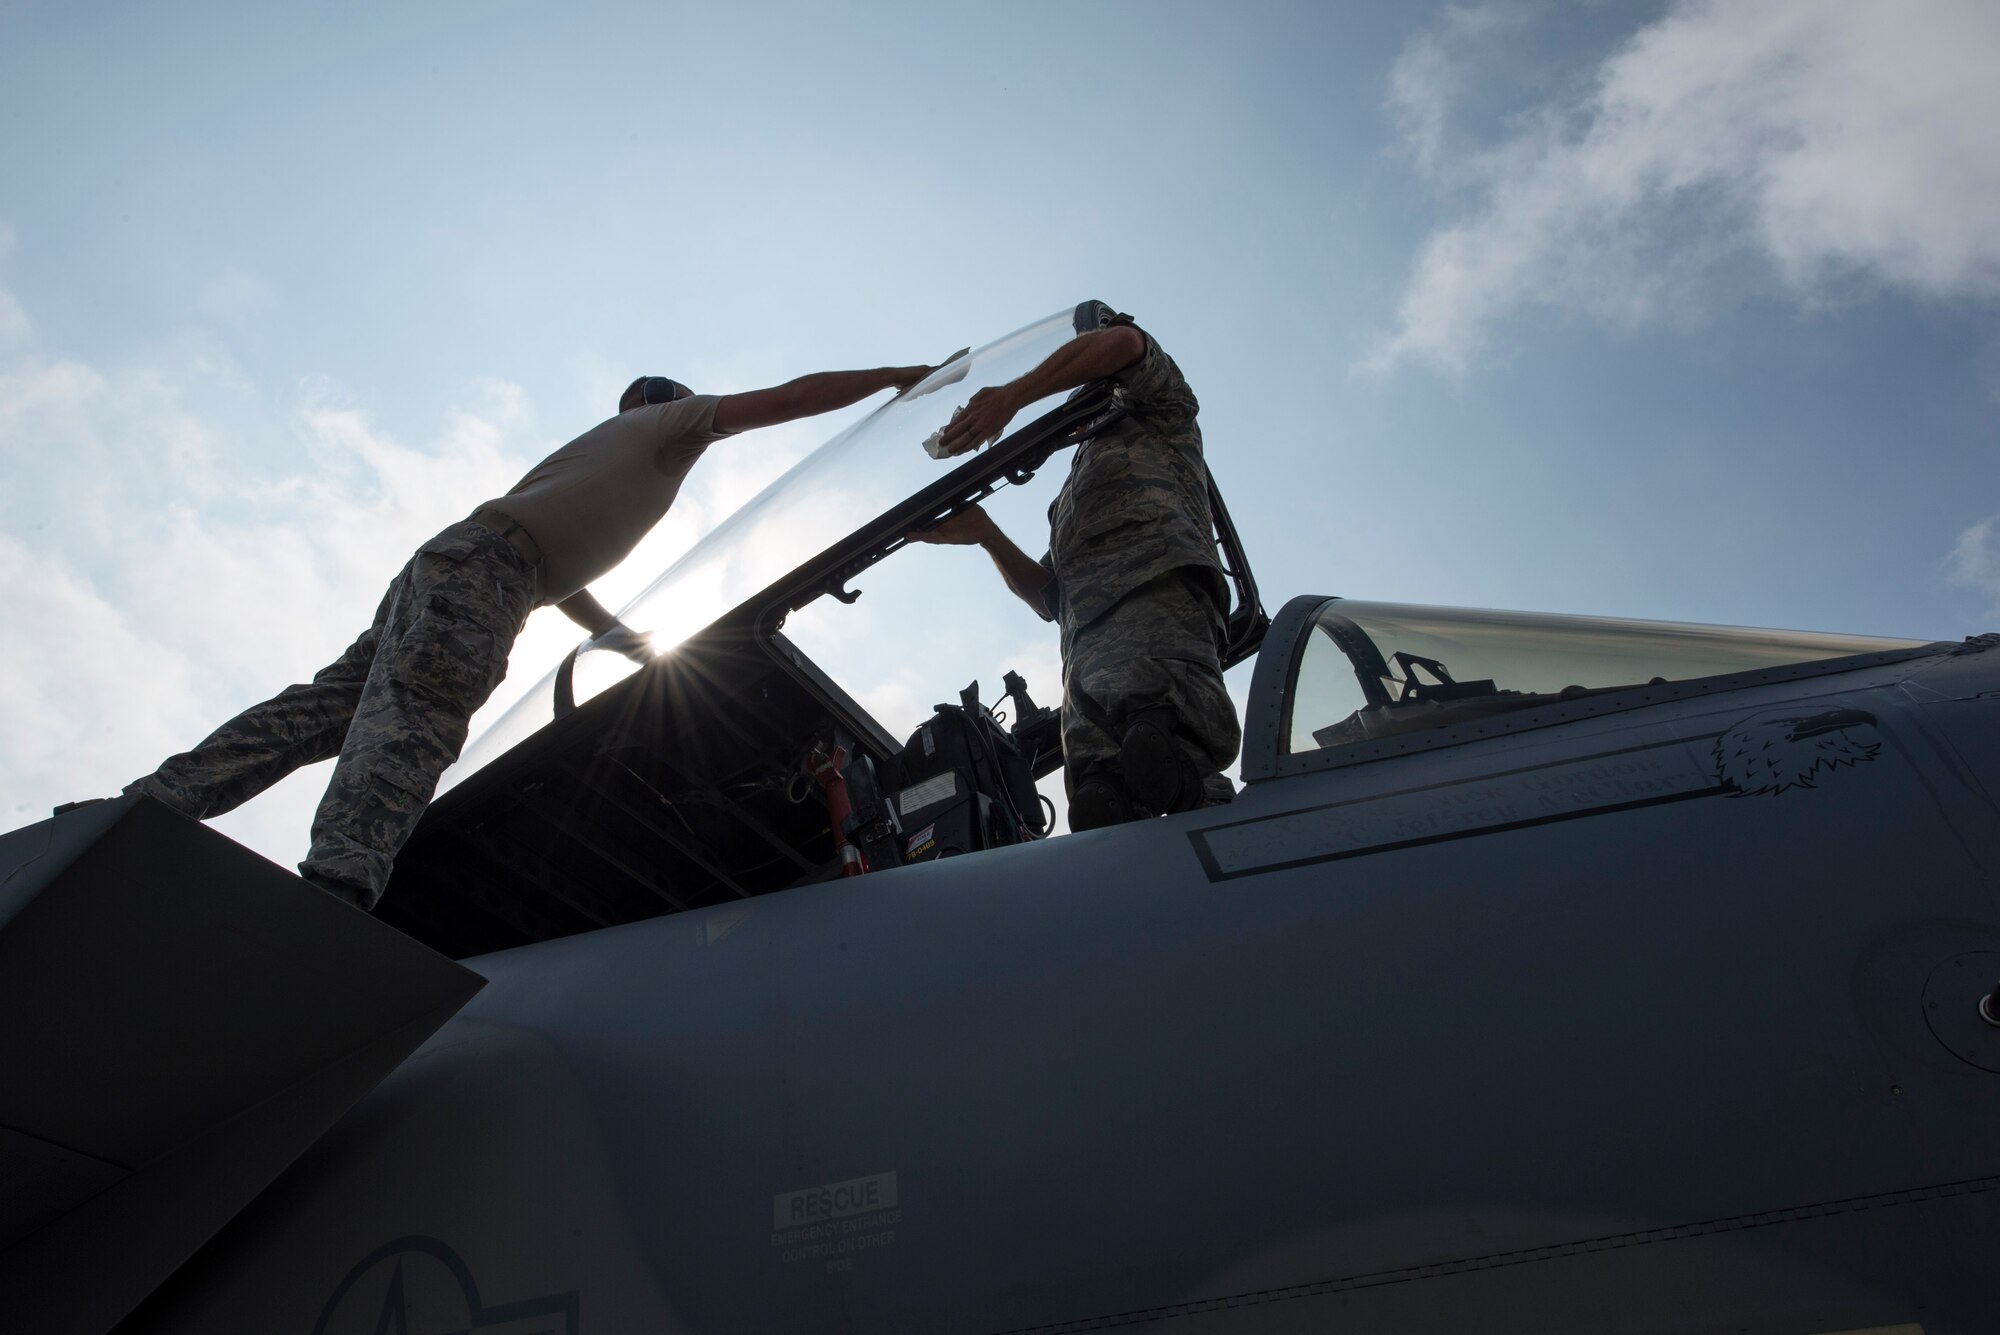 Crew chiefs from the 123rd Expeditionary Fighter Squadron, 142nd Fighter Wing, Oregon Air National Guard, clean the canopy on an F-15C Eagle fighter aircraft during a theater security package deployment Sept. 25, 2015, at Campia Turzii, Romania. The U.S. and Romanian air forces conducted training aimed at strengthening interoperability and demonstrated shared commitment to the security and stability of Europe. (U.S. Air Force photo by Staff Sgt. Christopher Ruano/Released)